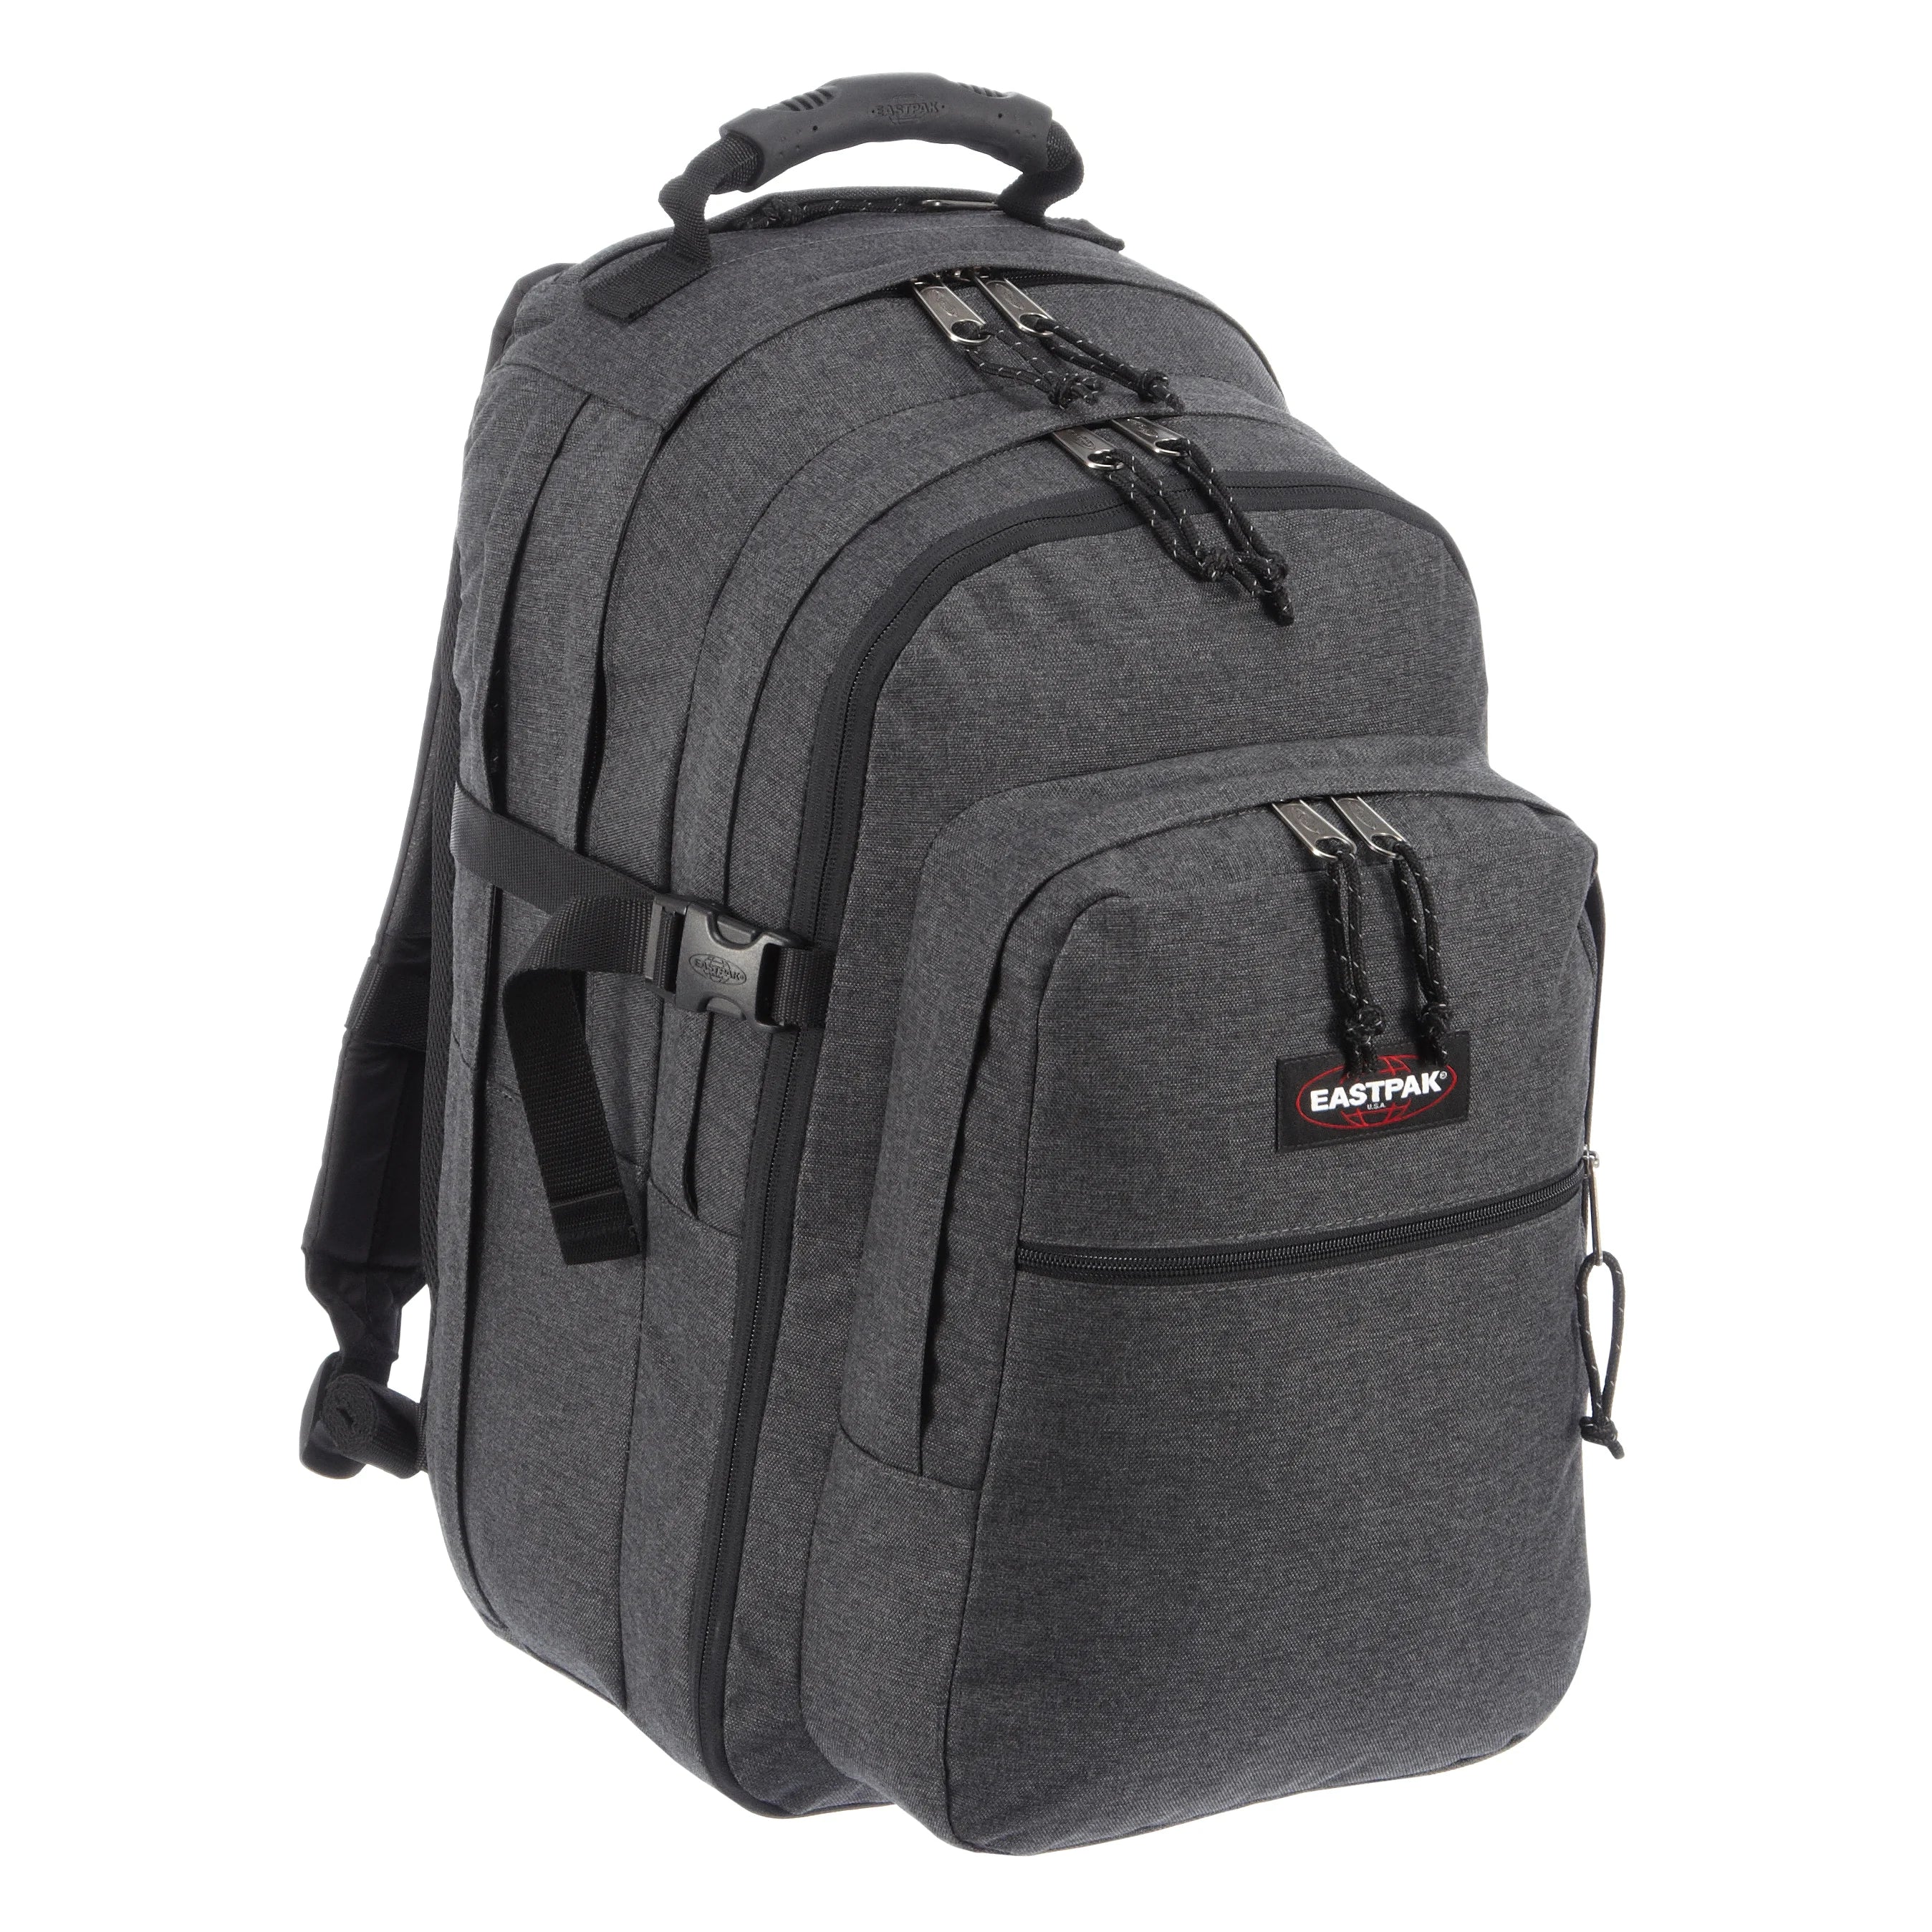 Eastpak Authentic Re-Check Tutor backpack with laptop compartment 48 cm - black denim